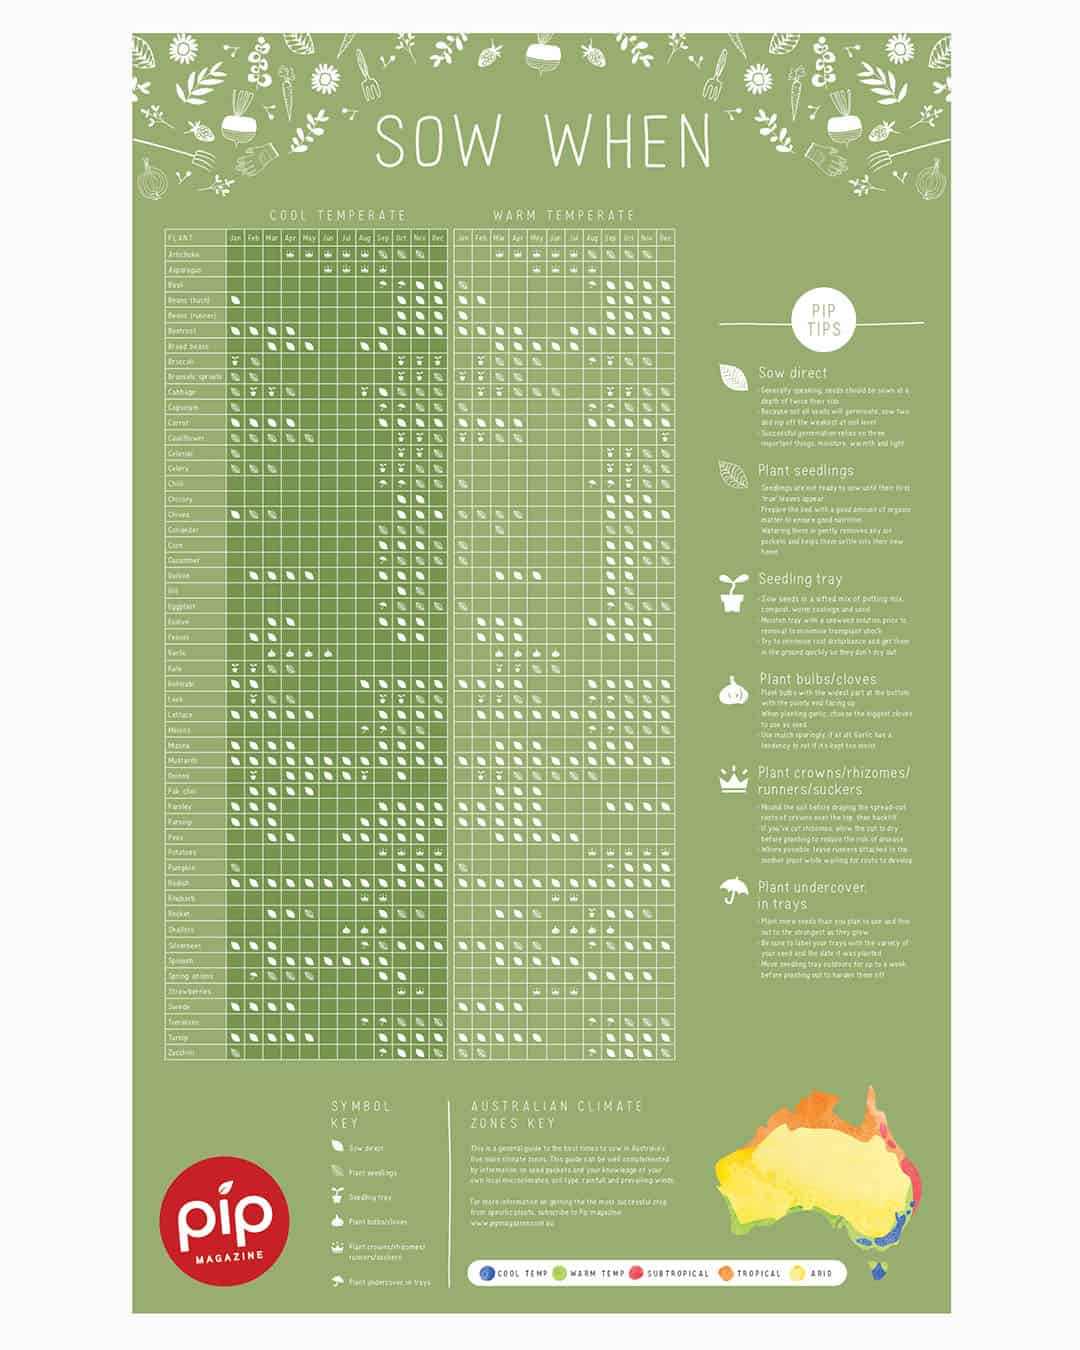 Pip Sow when planting poster